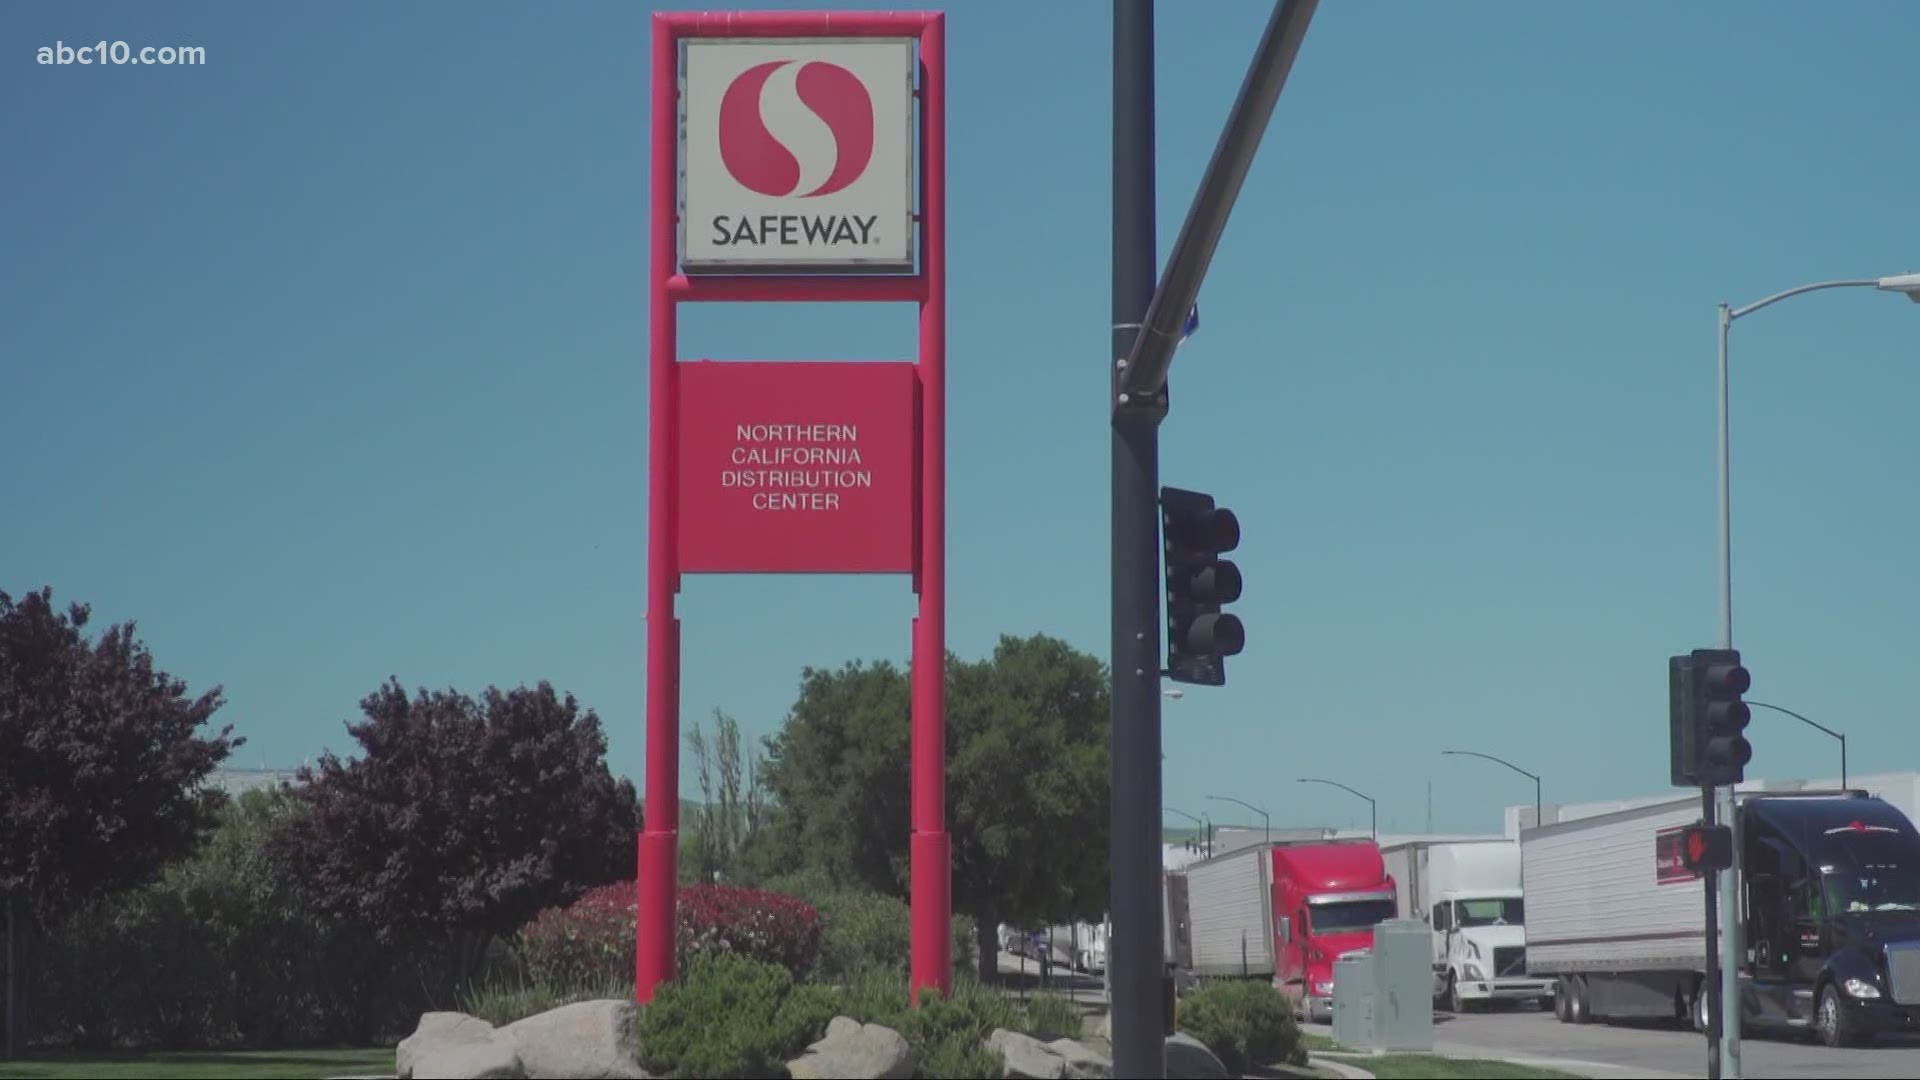 Safeway says they have been providing masks and gloves to employees, taking temperatures and placing social distancing markers on the ground.